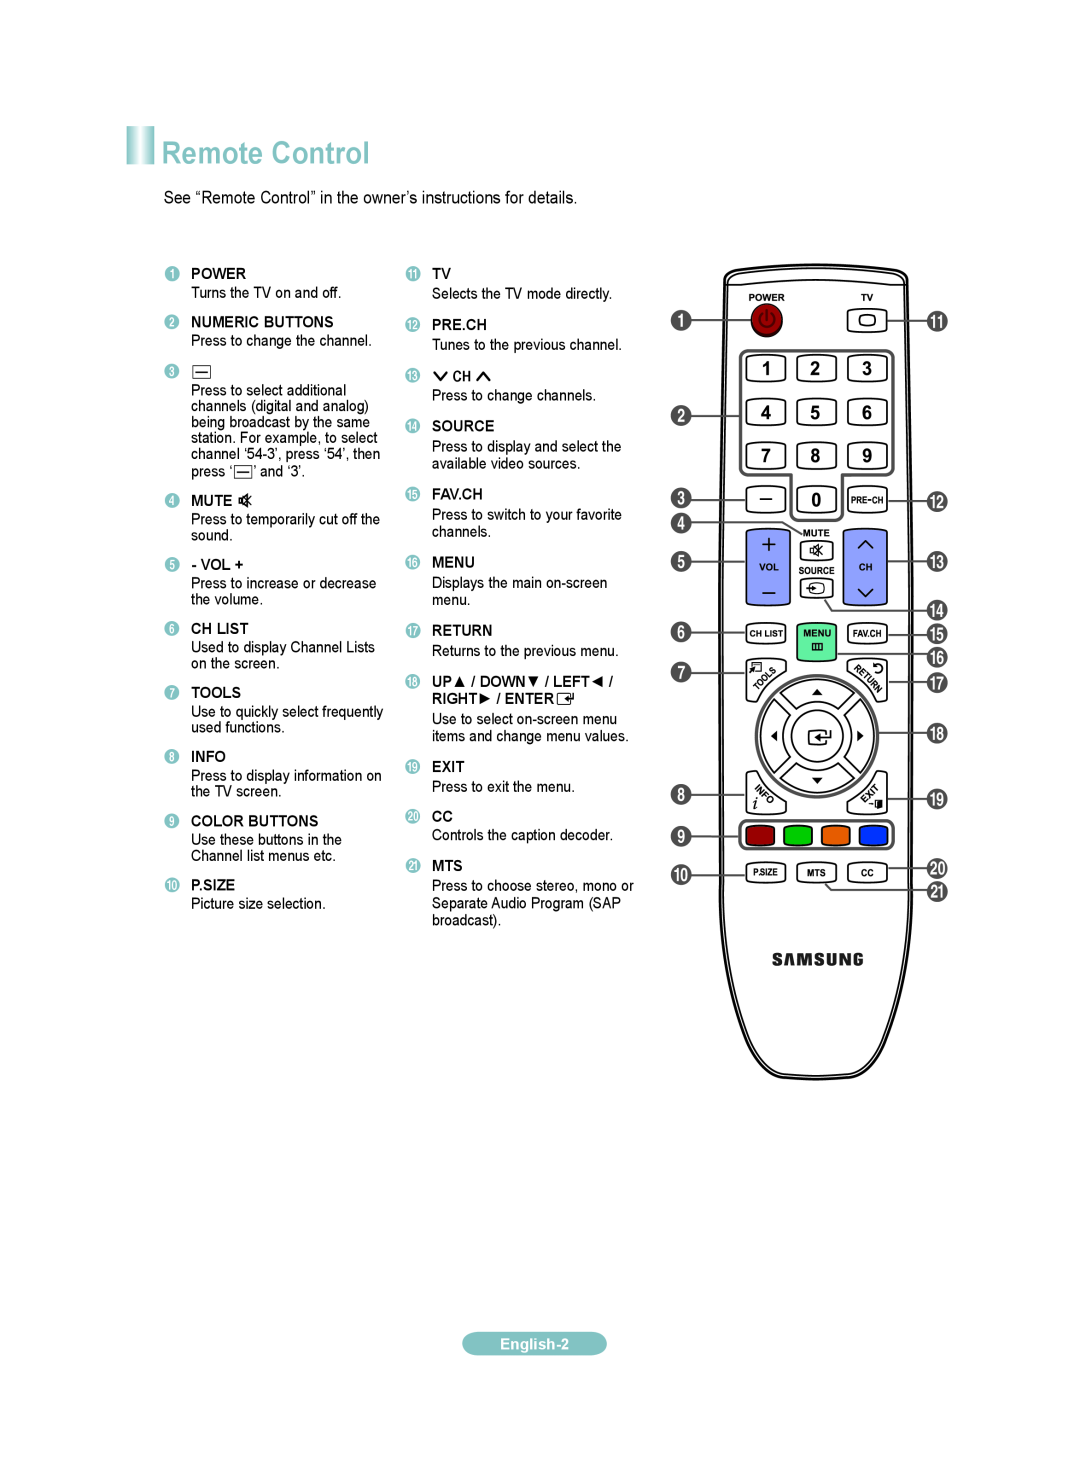 Samsung LN19B650, LN22B650 setup guide @ # $, See “Remote Control” in the owner’s instructions for details, English- 